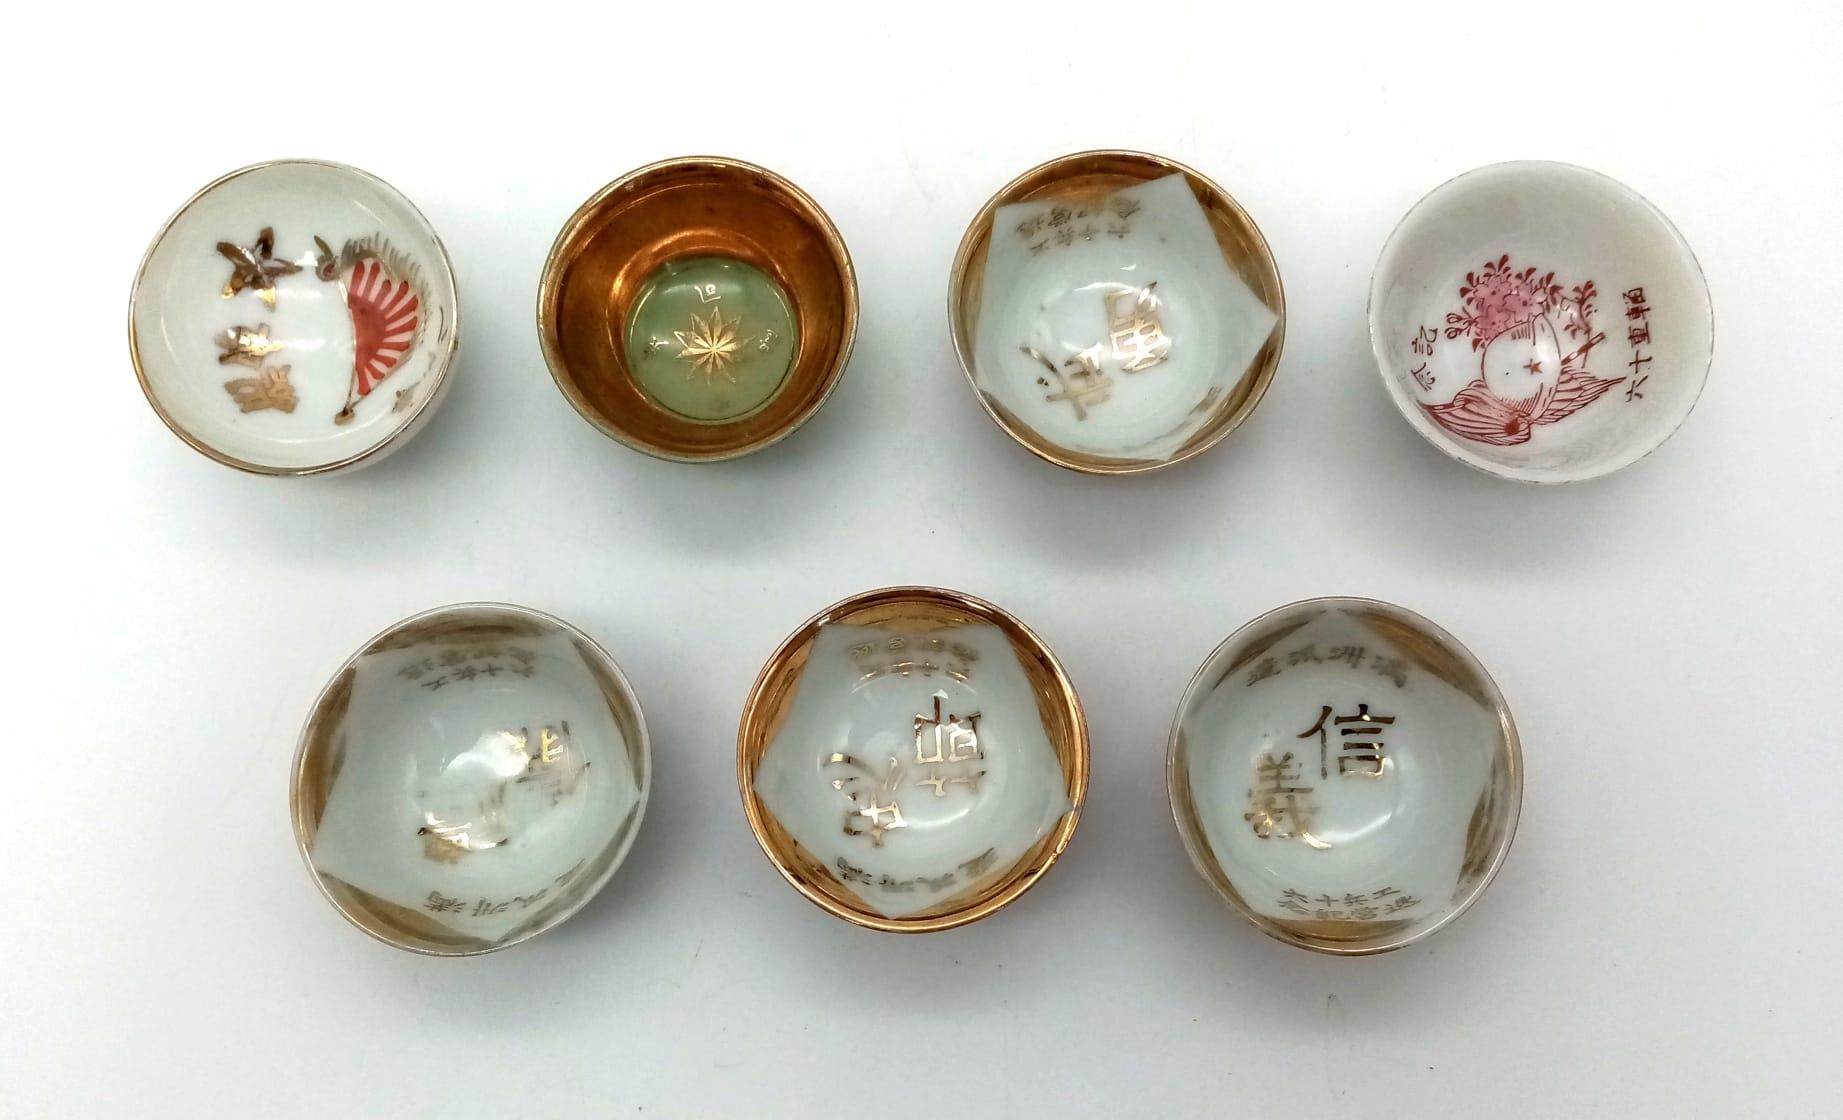 An Assortment of 7 Antique Japanese Bone China Saki cups. good condition for age, some nicely